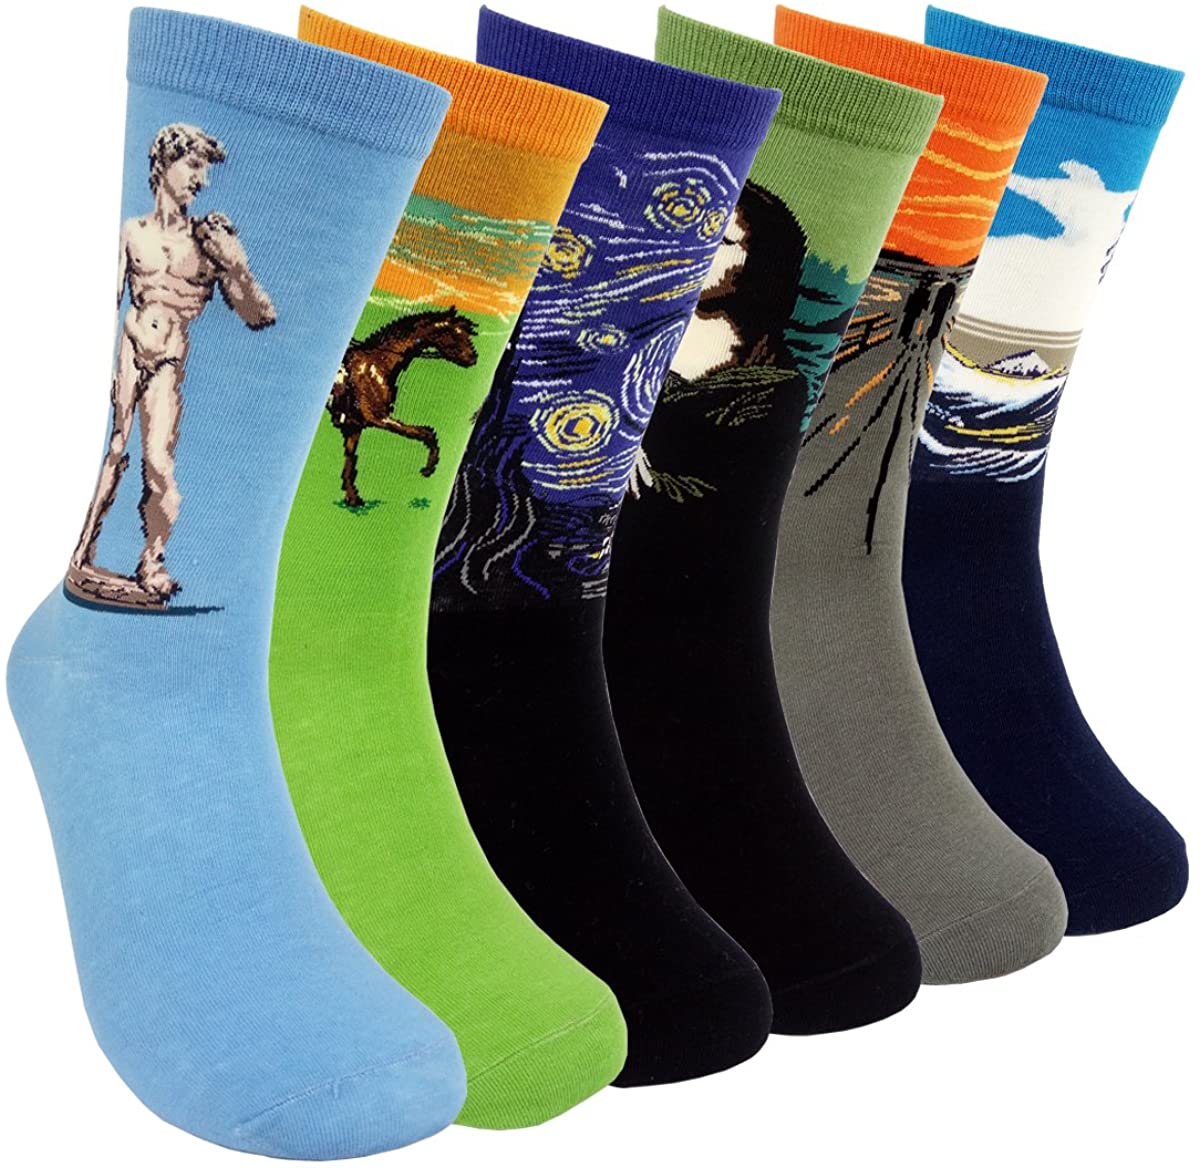 Famous Painting Art Printed Mens Dress Socks - HSELL Crazy P